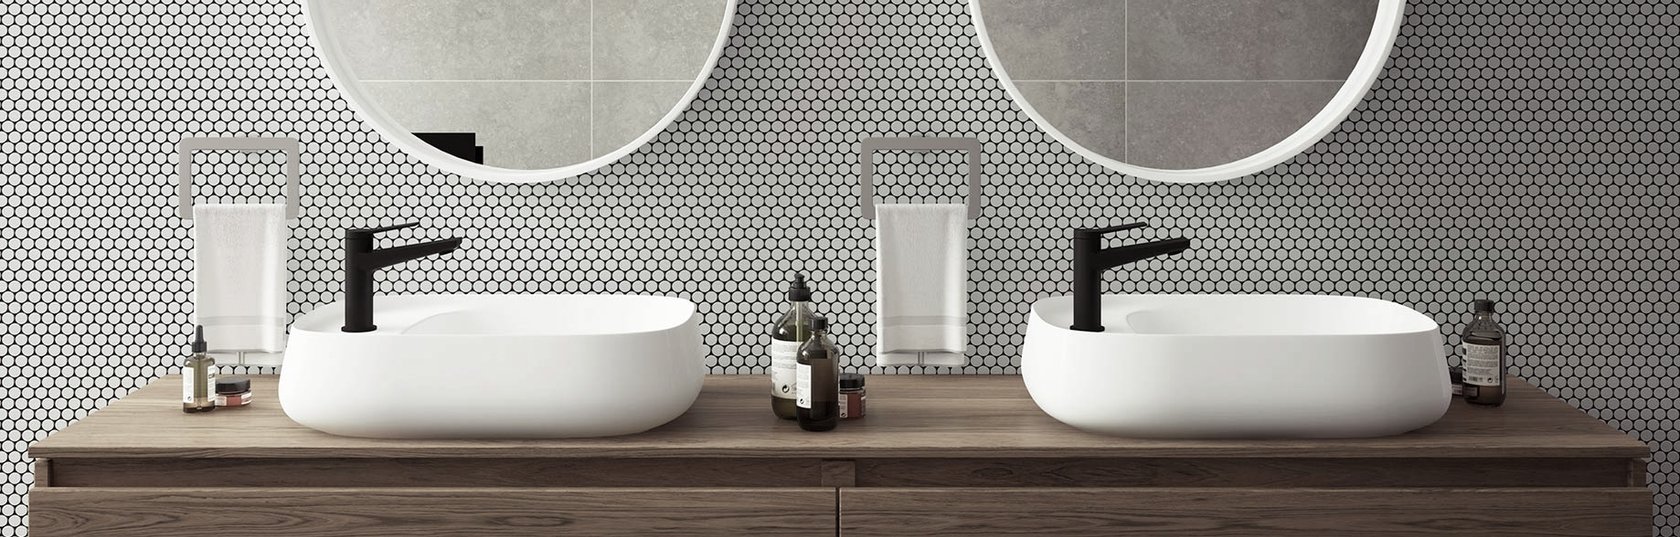 Planning a New Bathroom? Start With the Basin